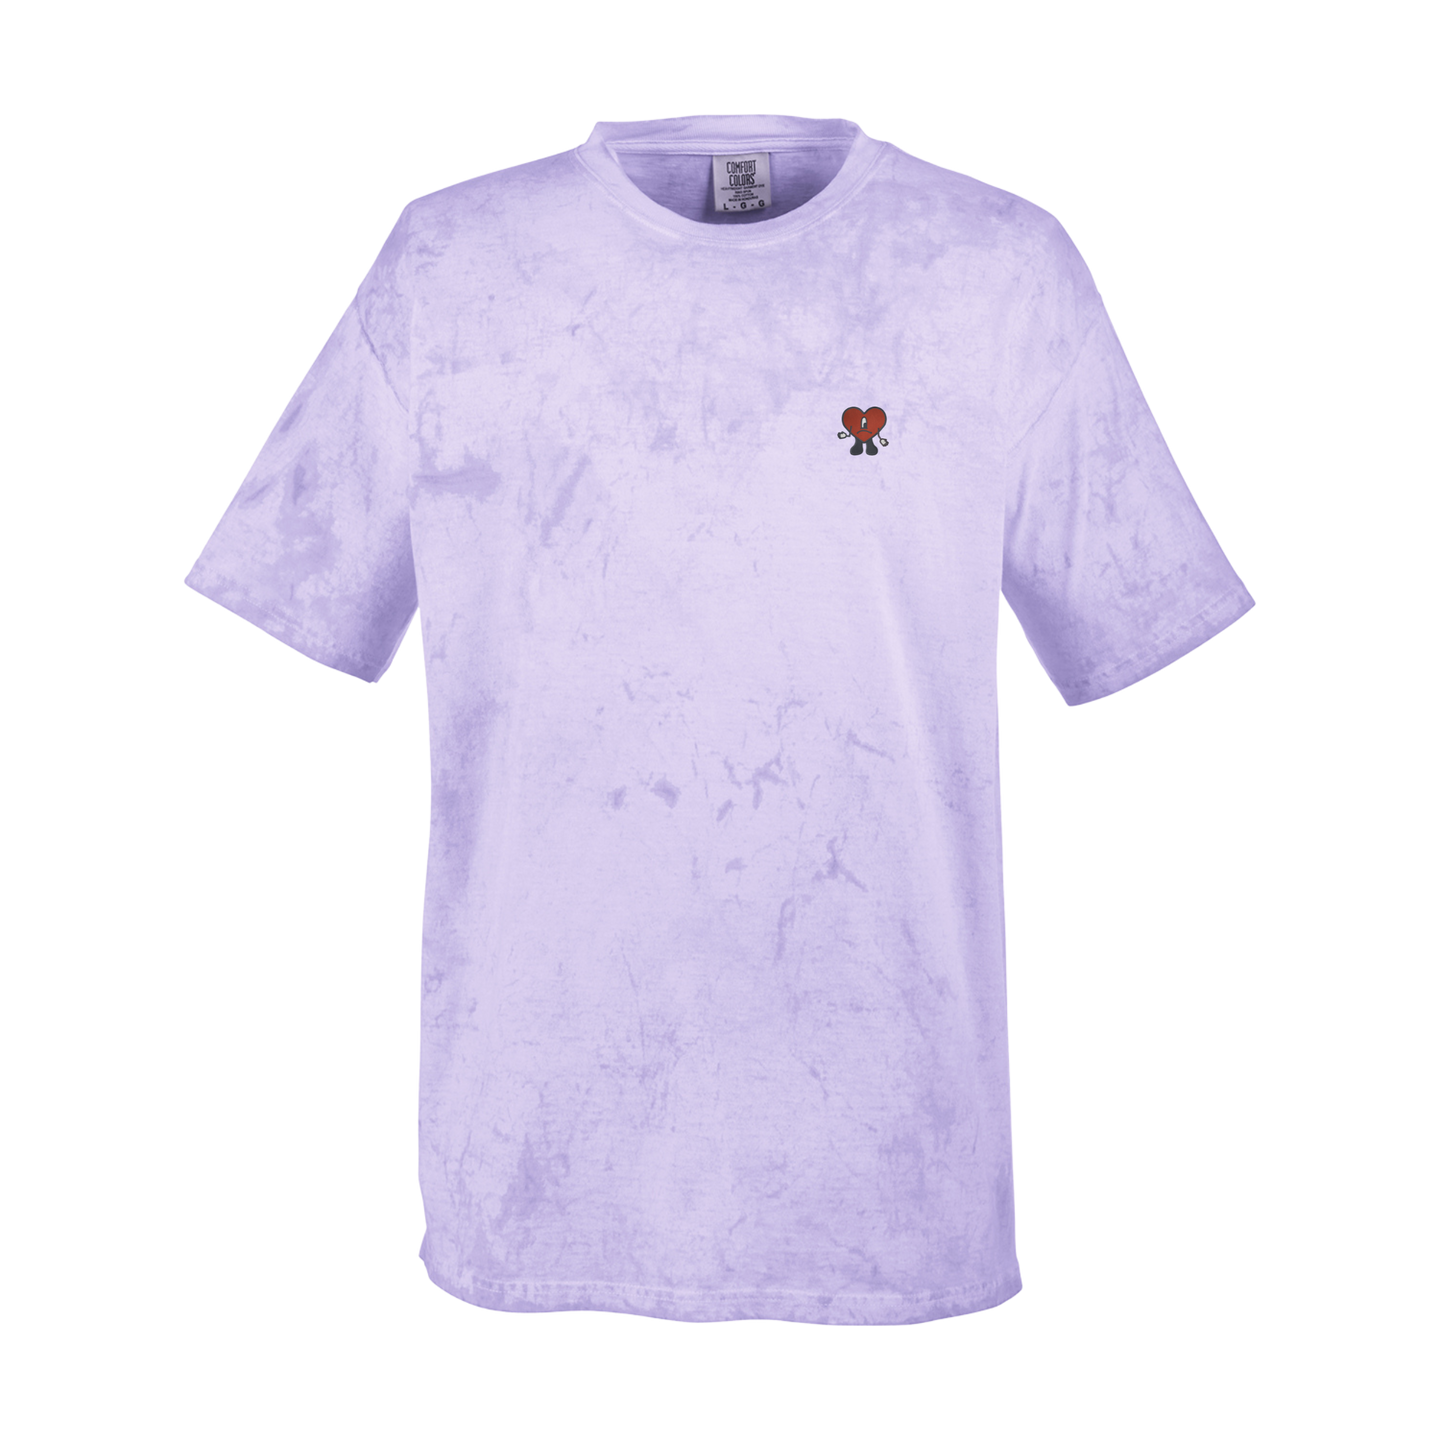 Sad Heart Tie Dye Embroidered T-shirt